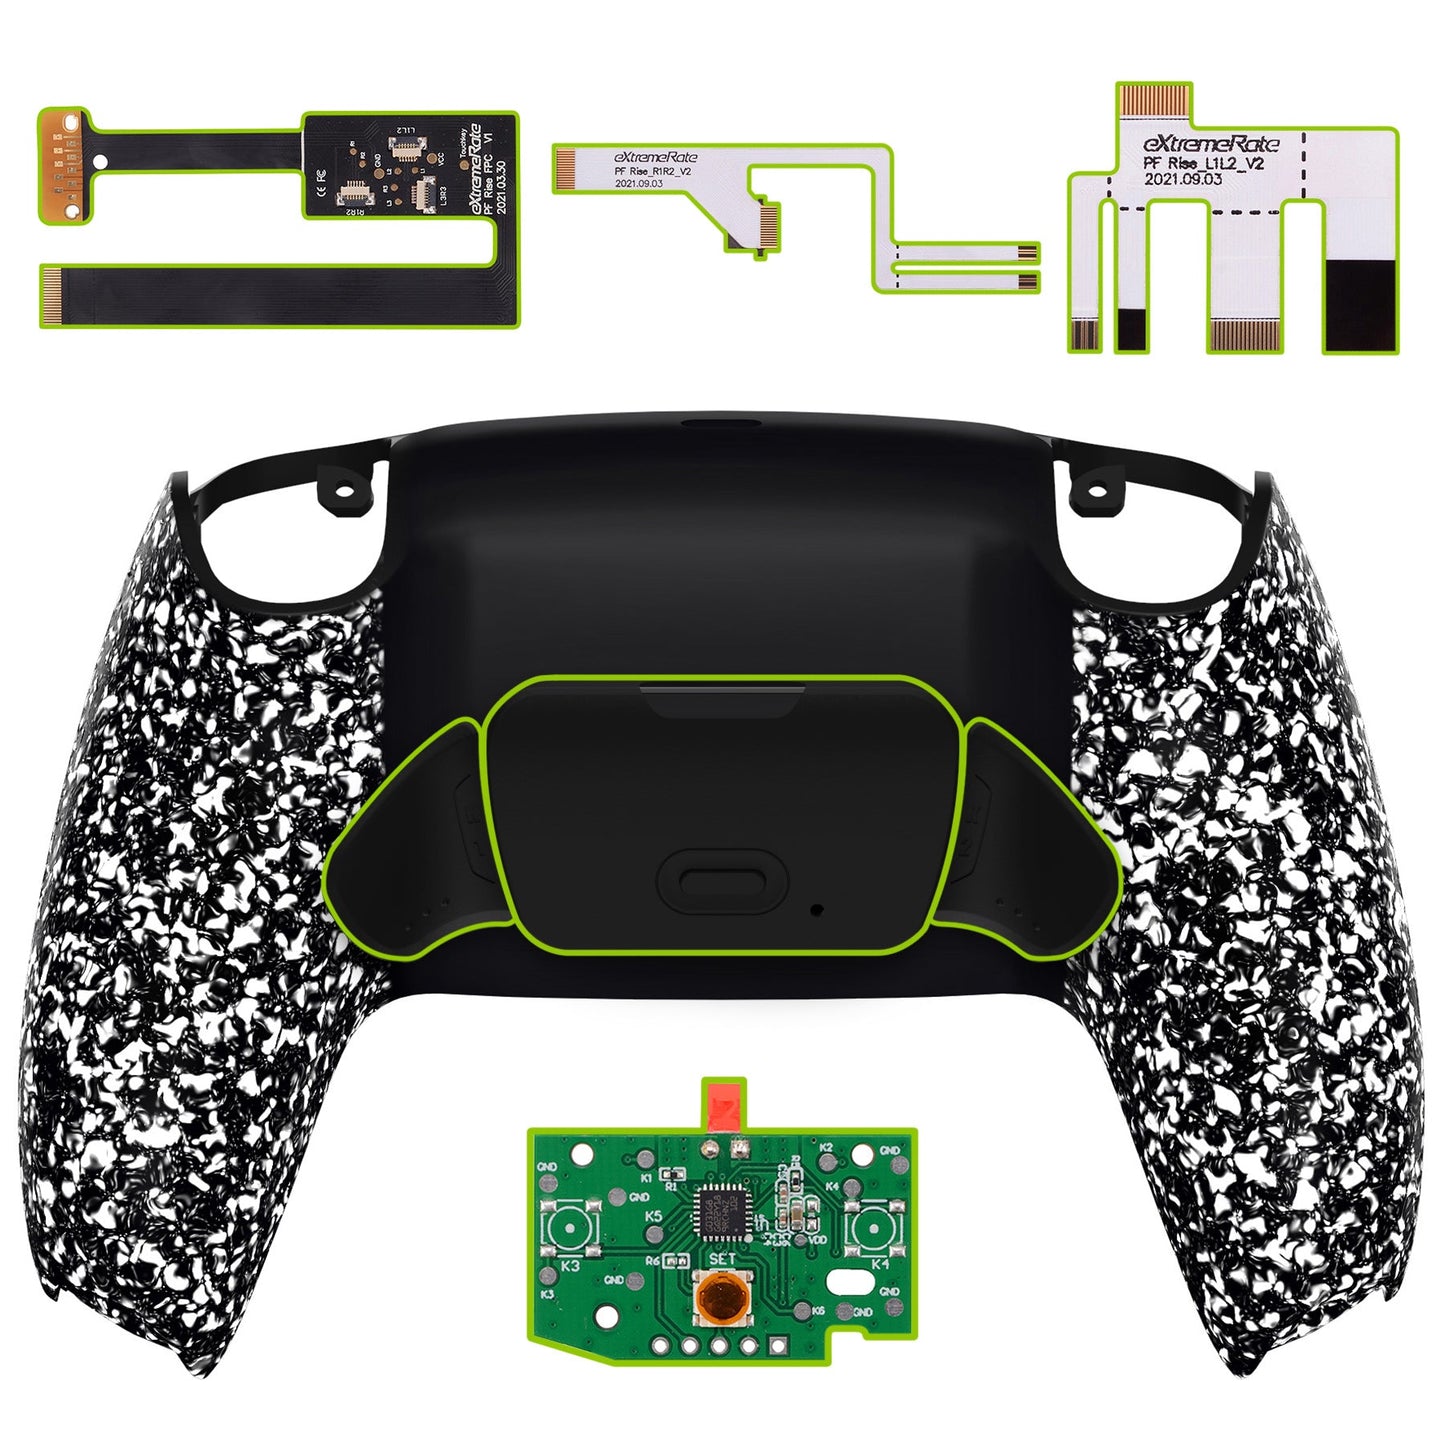 eXtremeRate Retail Textured White Back Paddles Remappable Rise Remap Kit with Upgrade Board & Redesigned Back Shell & Back Buttons Attachment for ps5 Controller BDM-010 & BDM-020 - XPFP3041G2